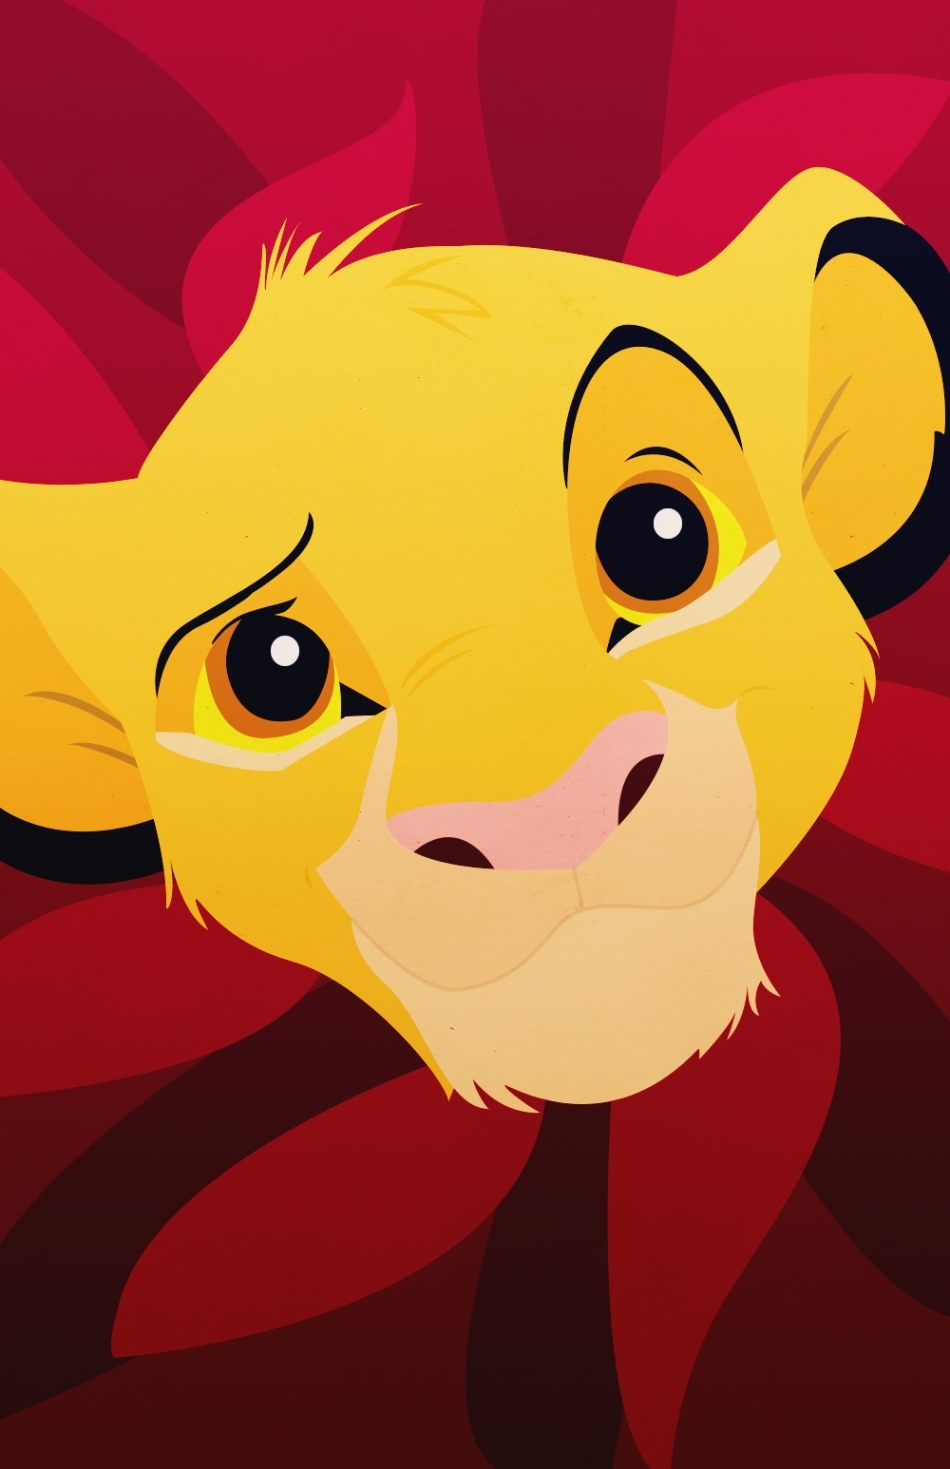 1000 Images About Wallpapers On Pinterest - Lion King Simba Iphone - HD Wallpaper 